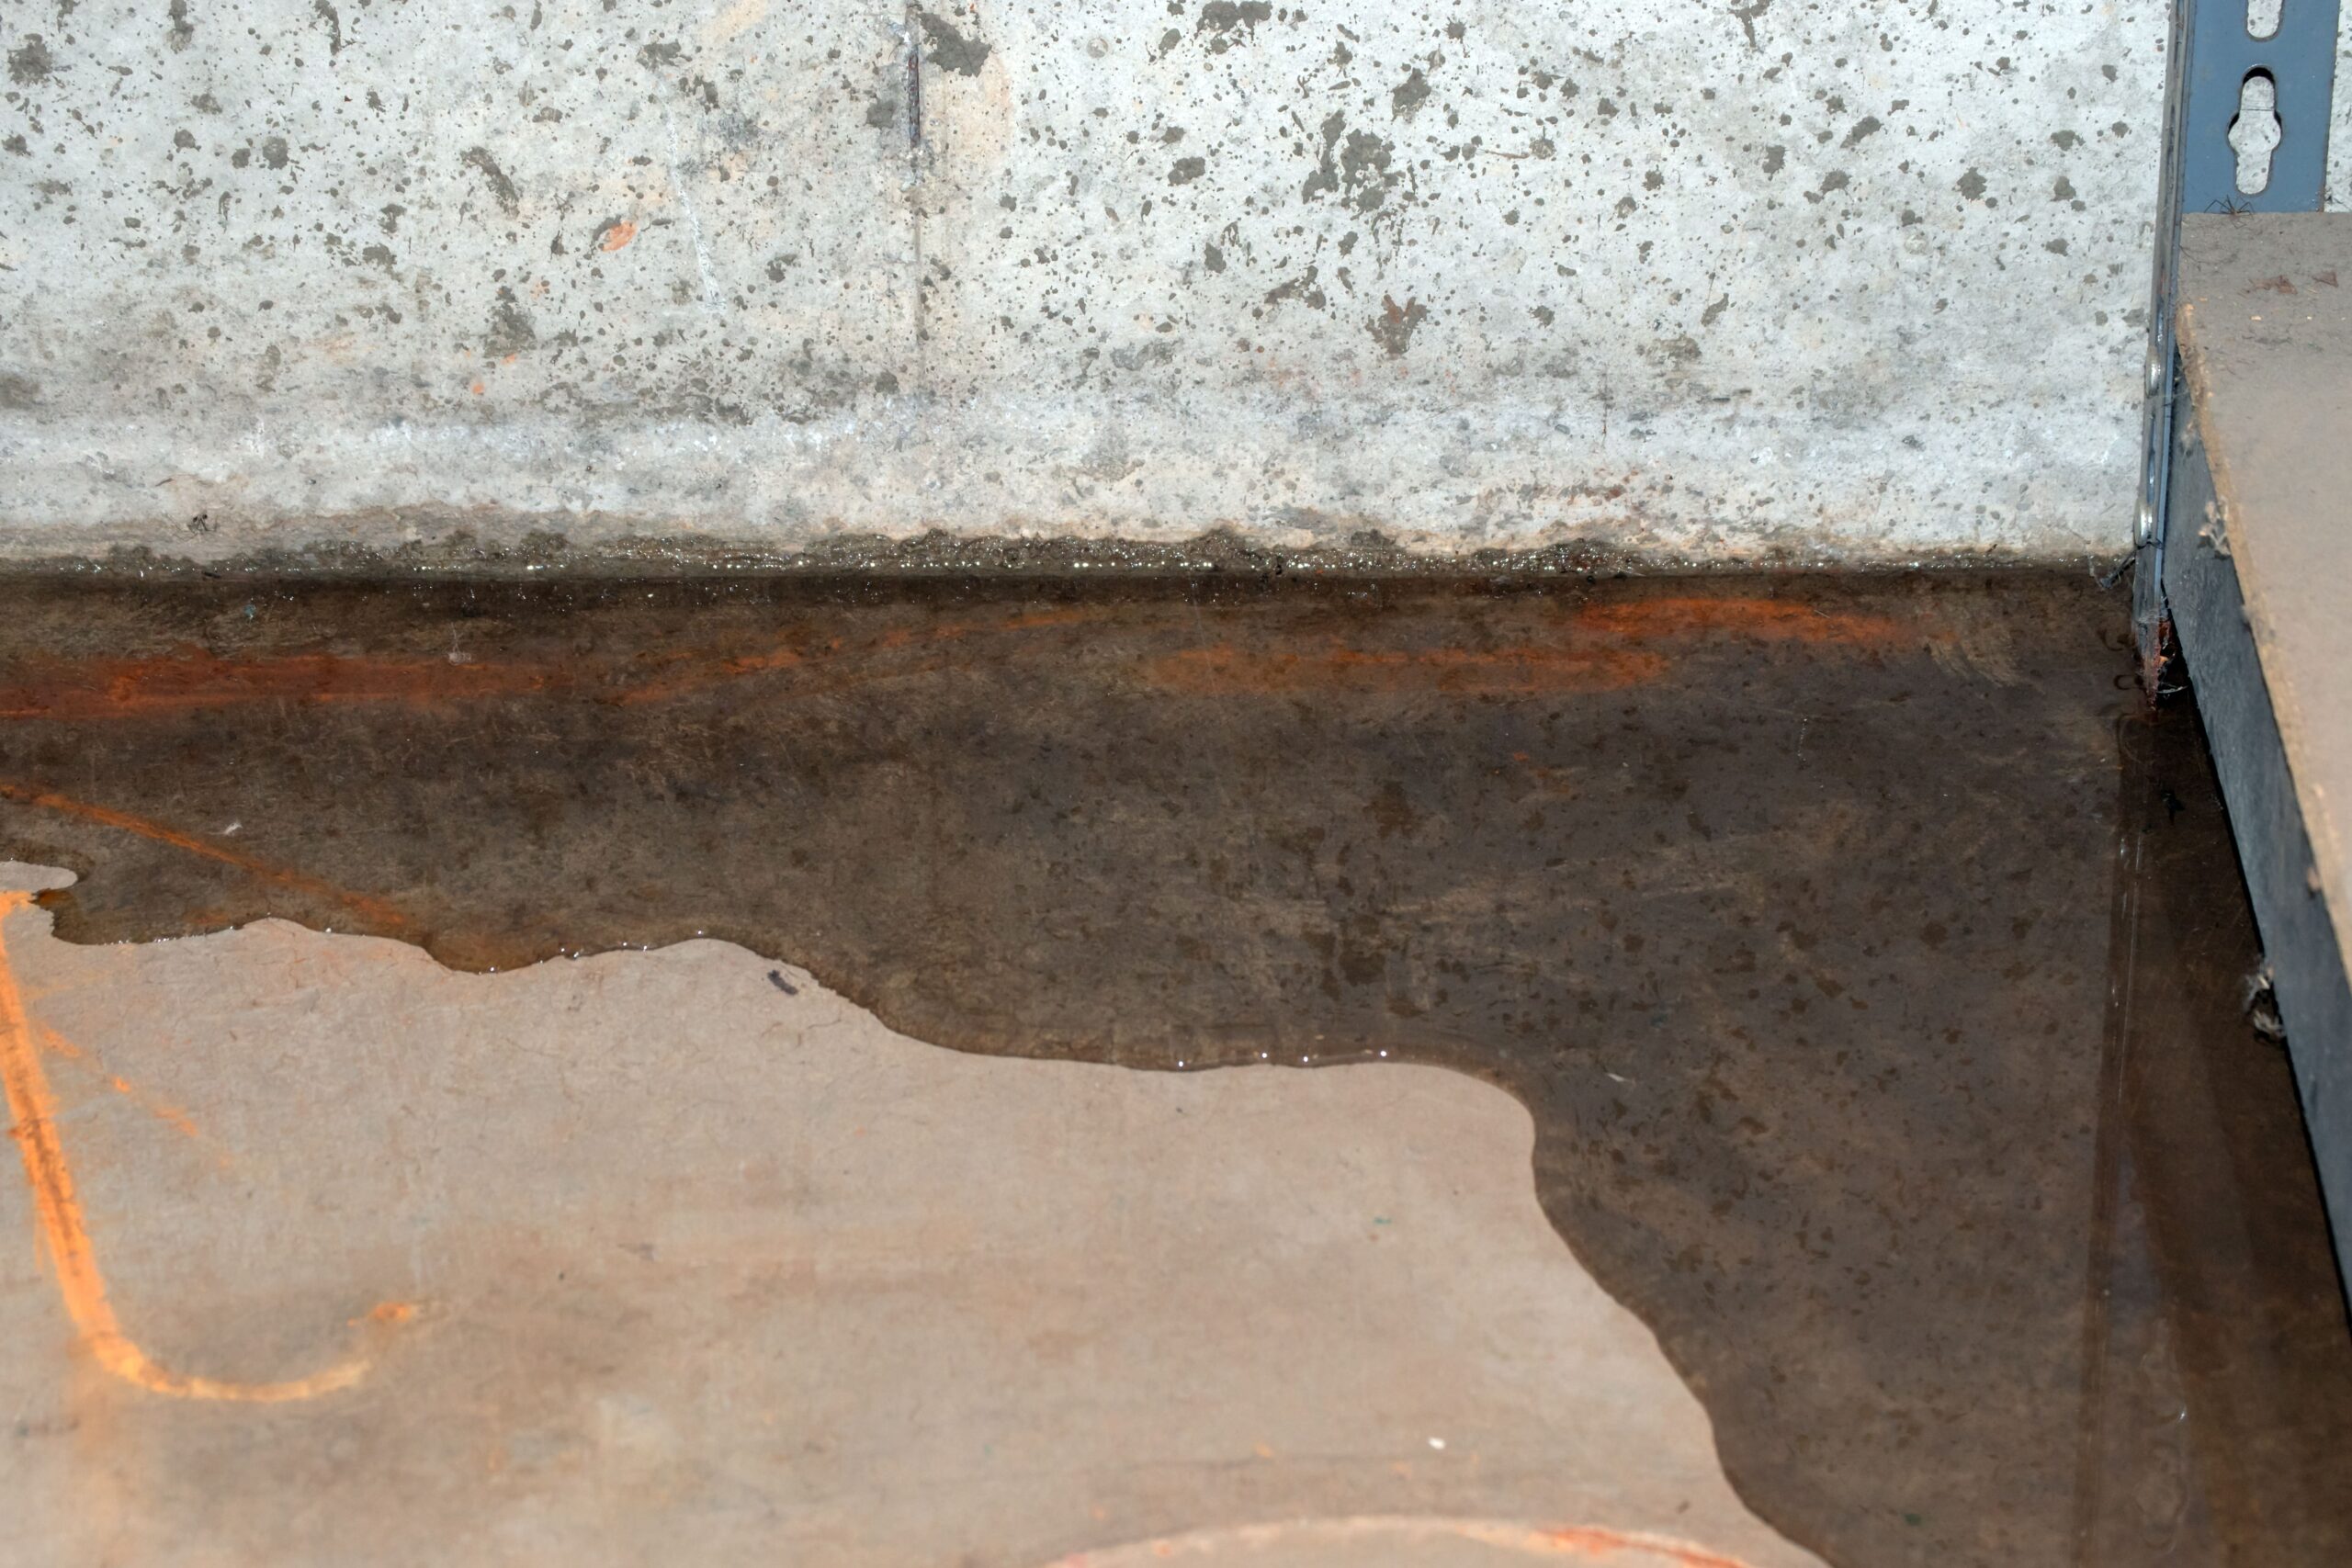 How Long Does It Take for Water to Damage a Home's Foundation?